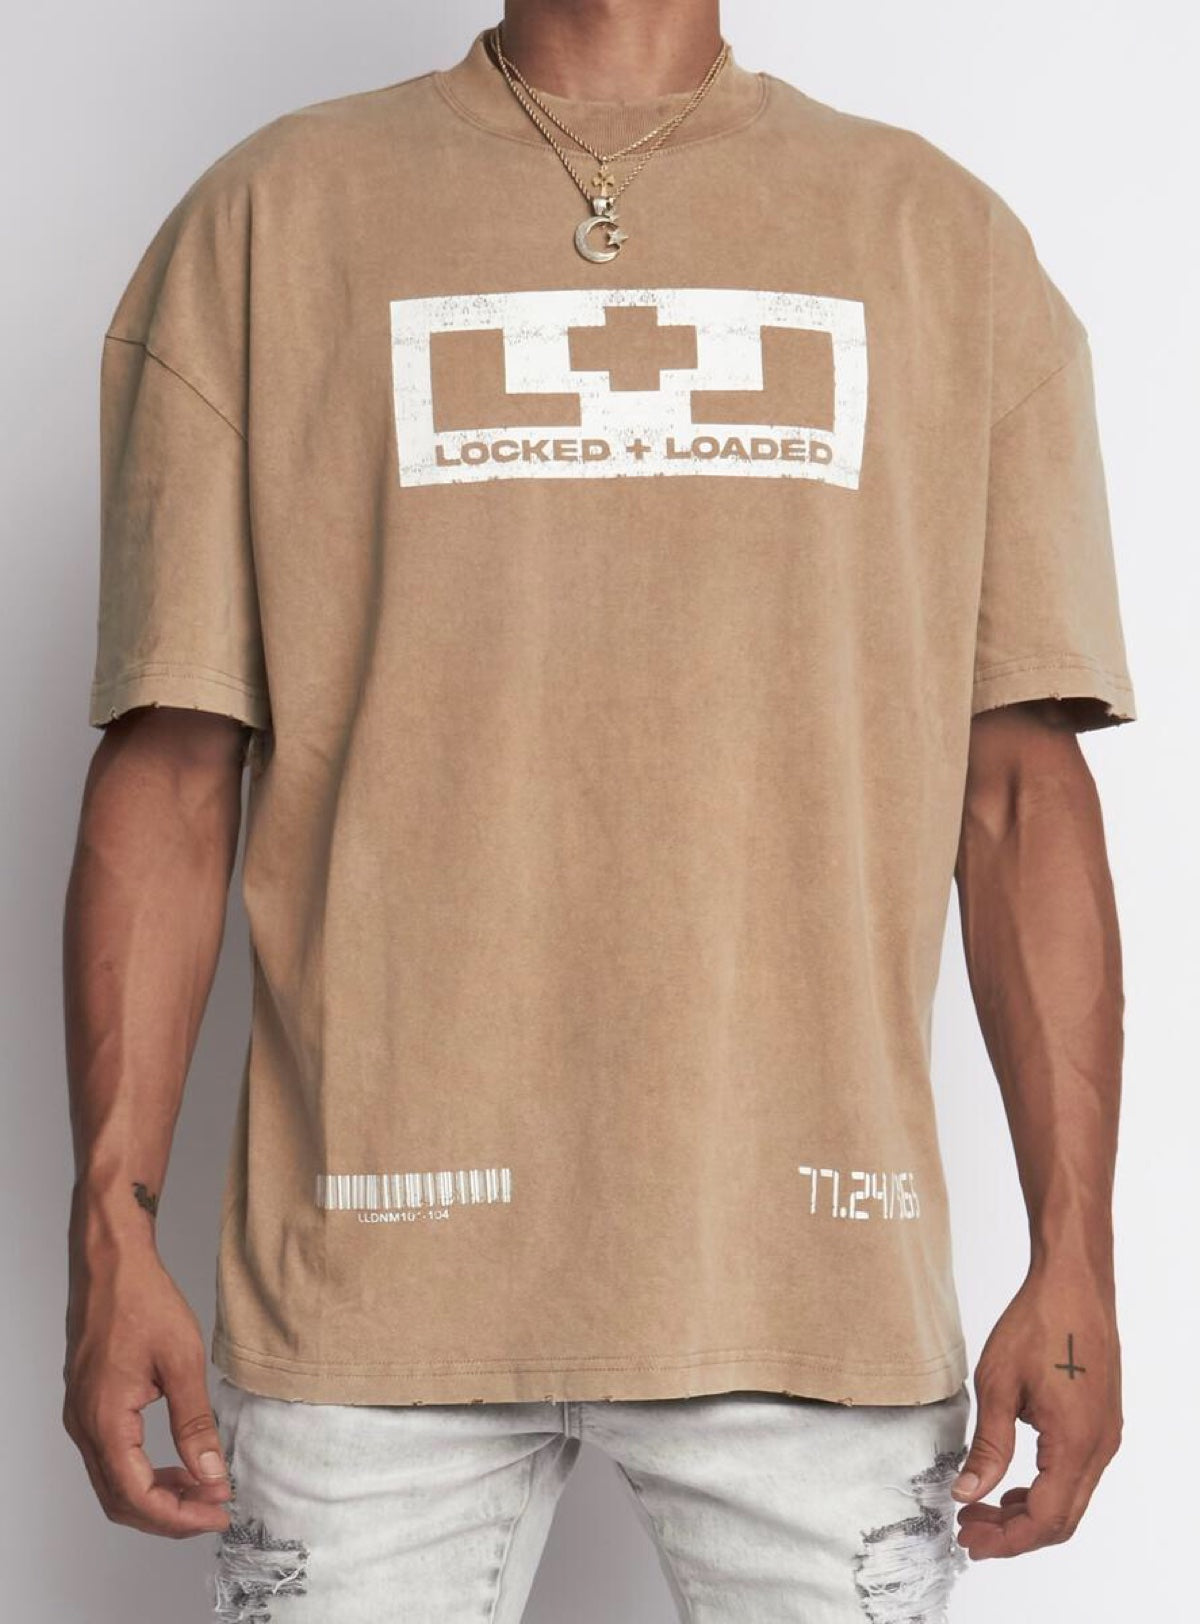 Locked & Loaded T-Shirt - Beckman - Oversized - Tan And White - 105